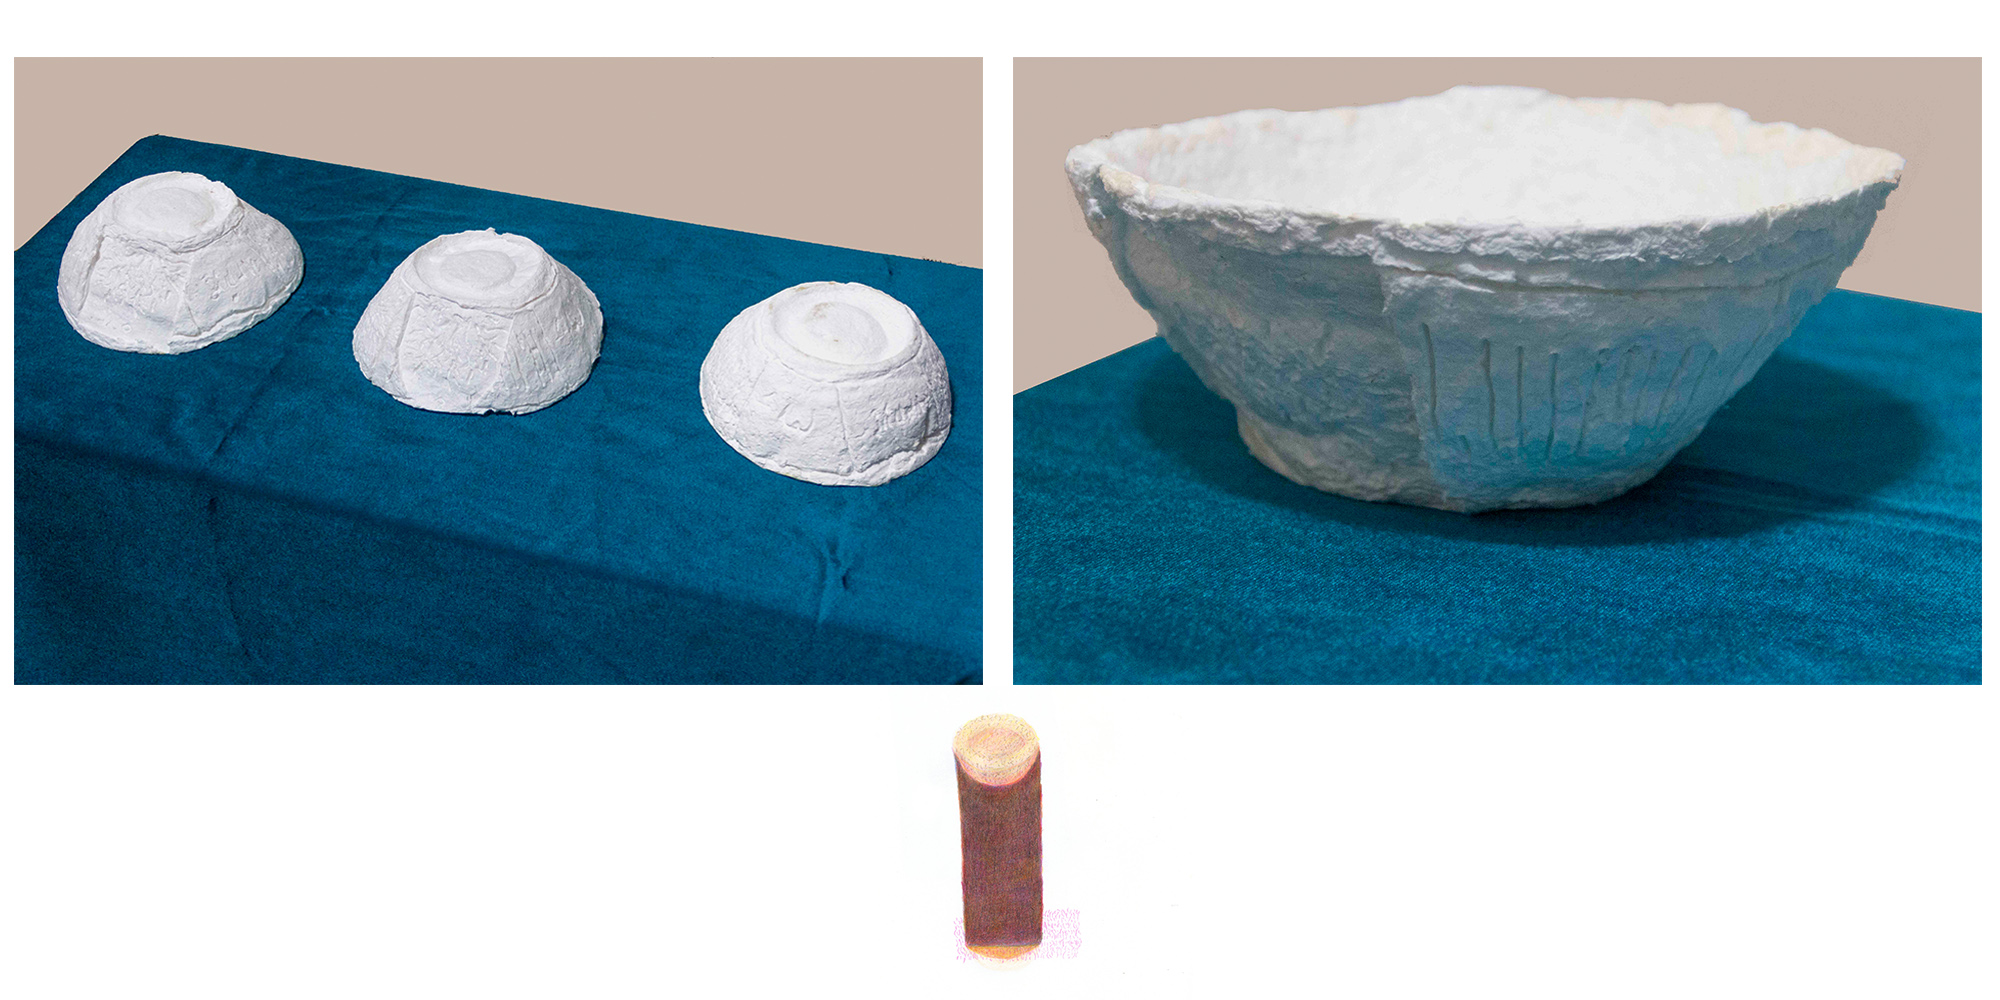 Sahand Heshmati Afshar - Toilet Paper Bowls of Oriental Institute of the University of Chicago